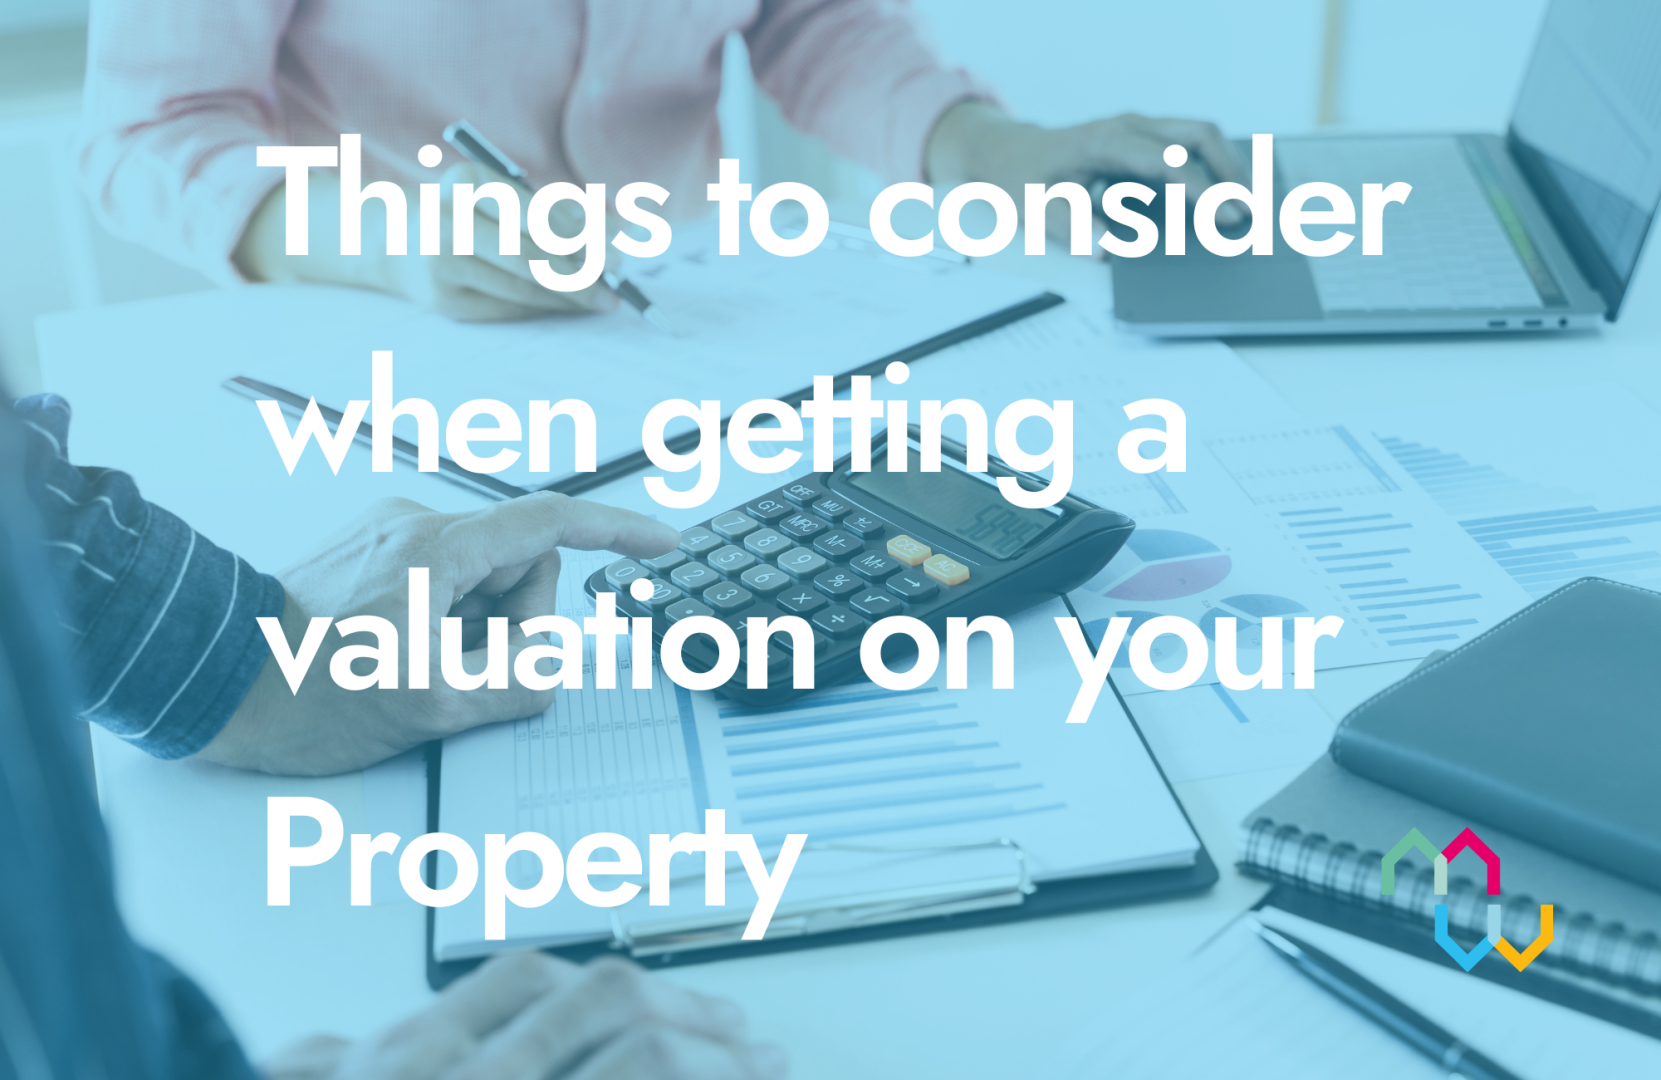 Things to consider when getting a valuation